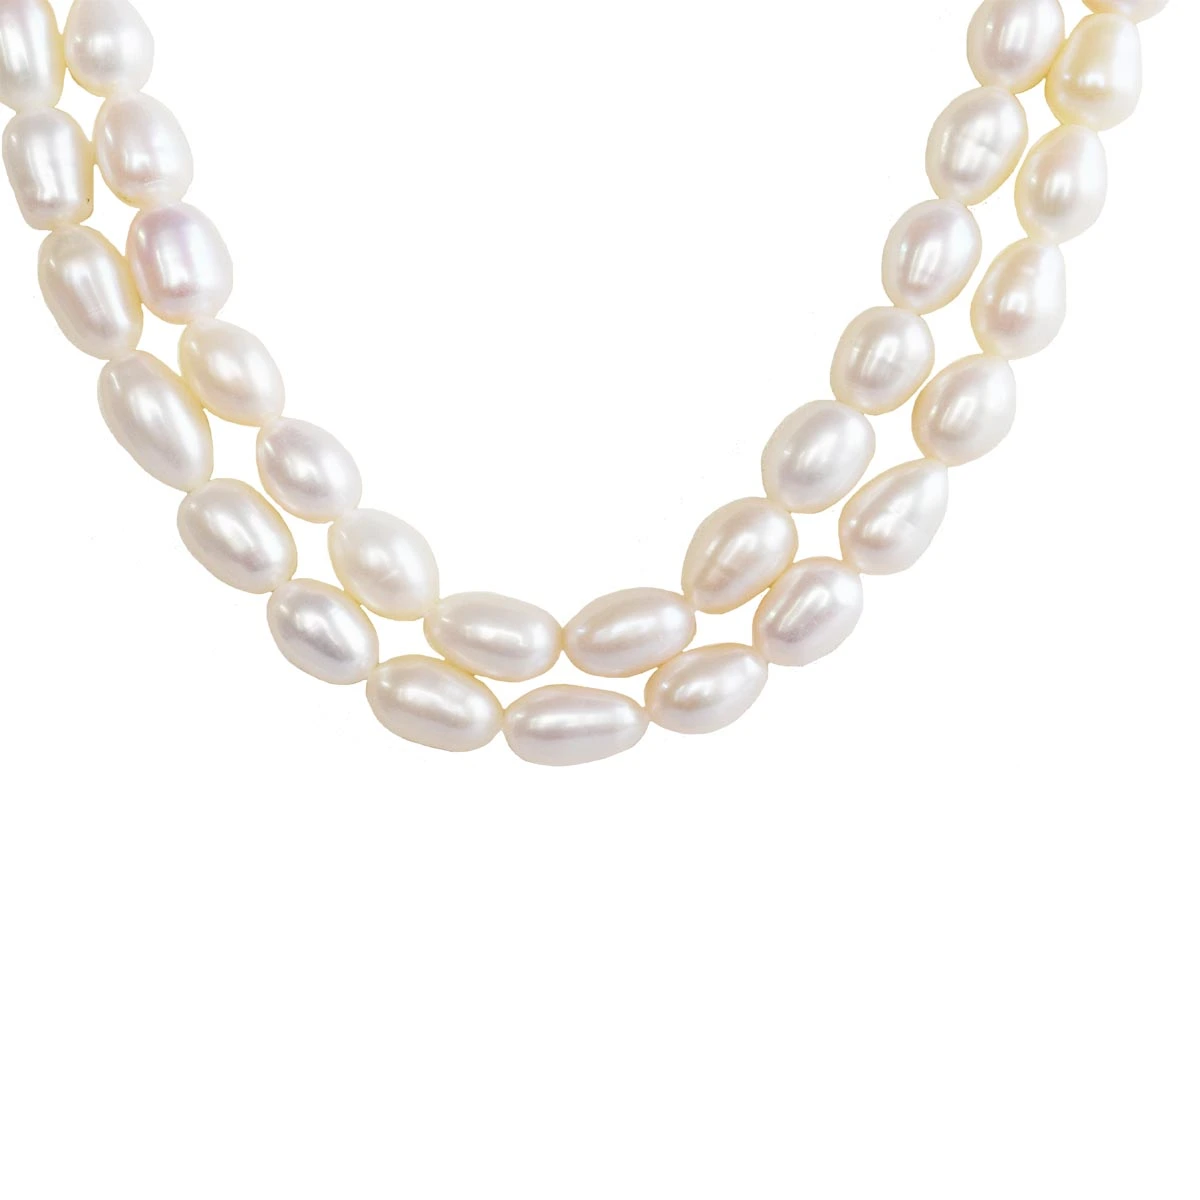 2 Line Real Big Elongated Pearl Necklace for Women (SN1008)